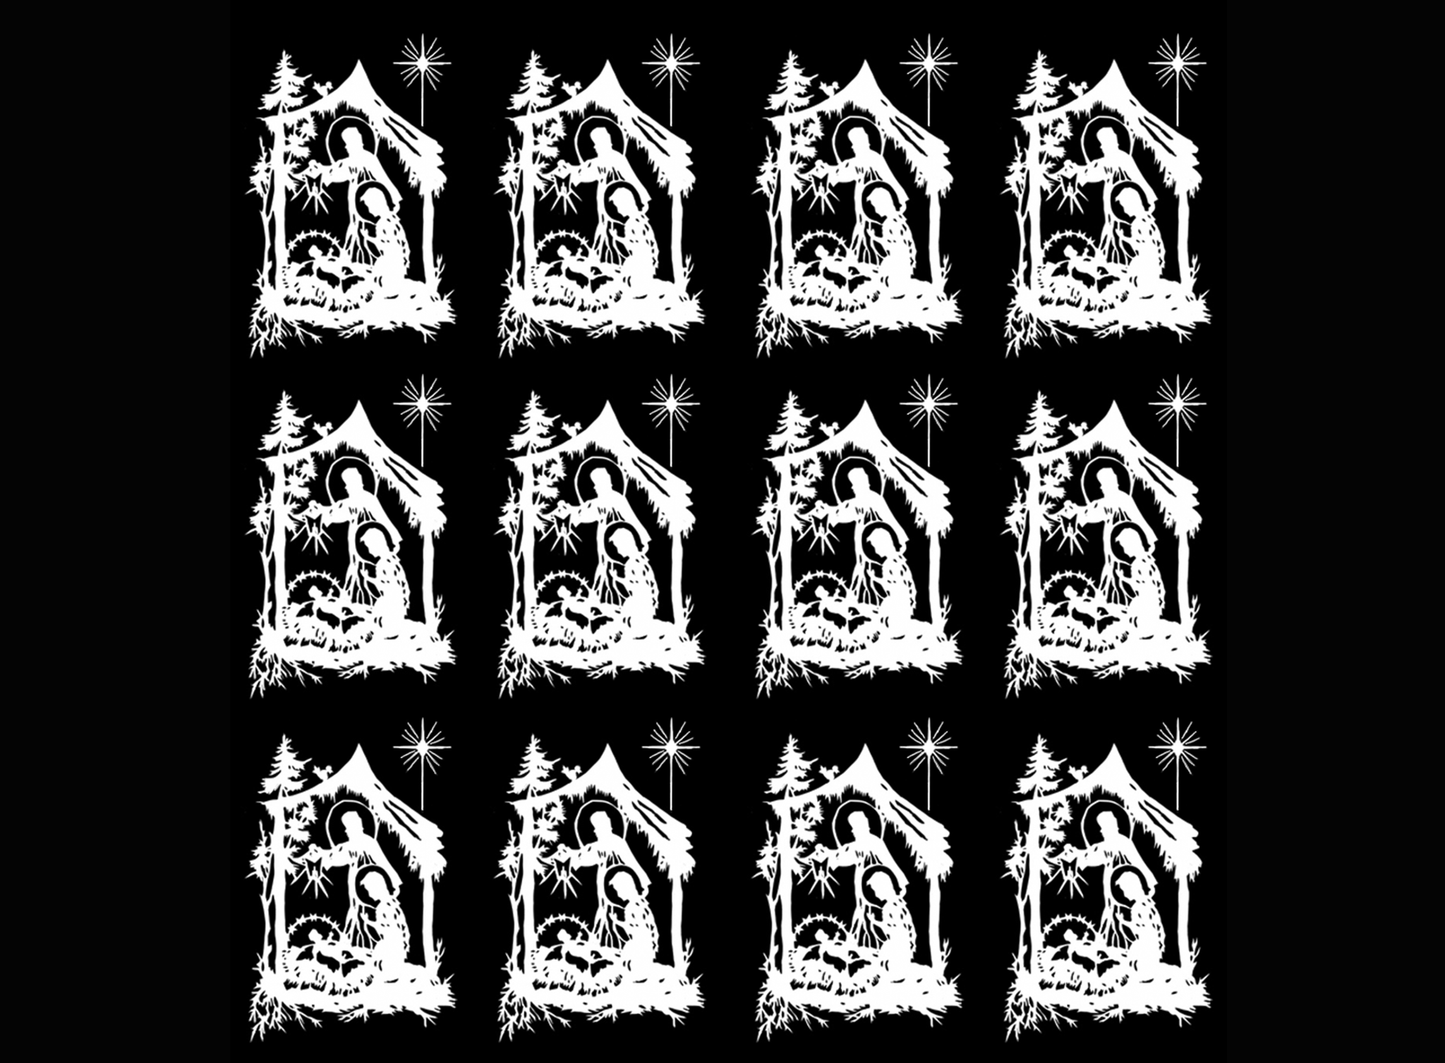 Christmas Nativity 24 pcs 1-1/16" White Fused Glass Decals